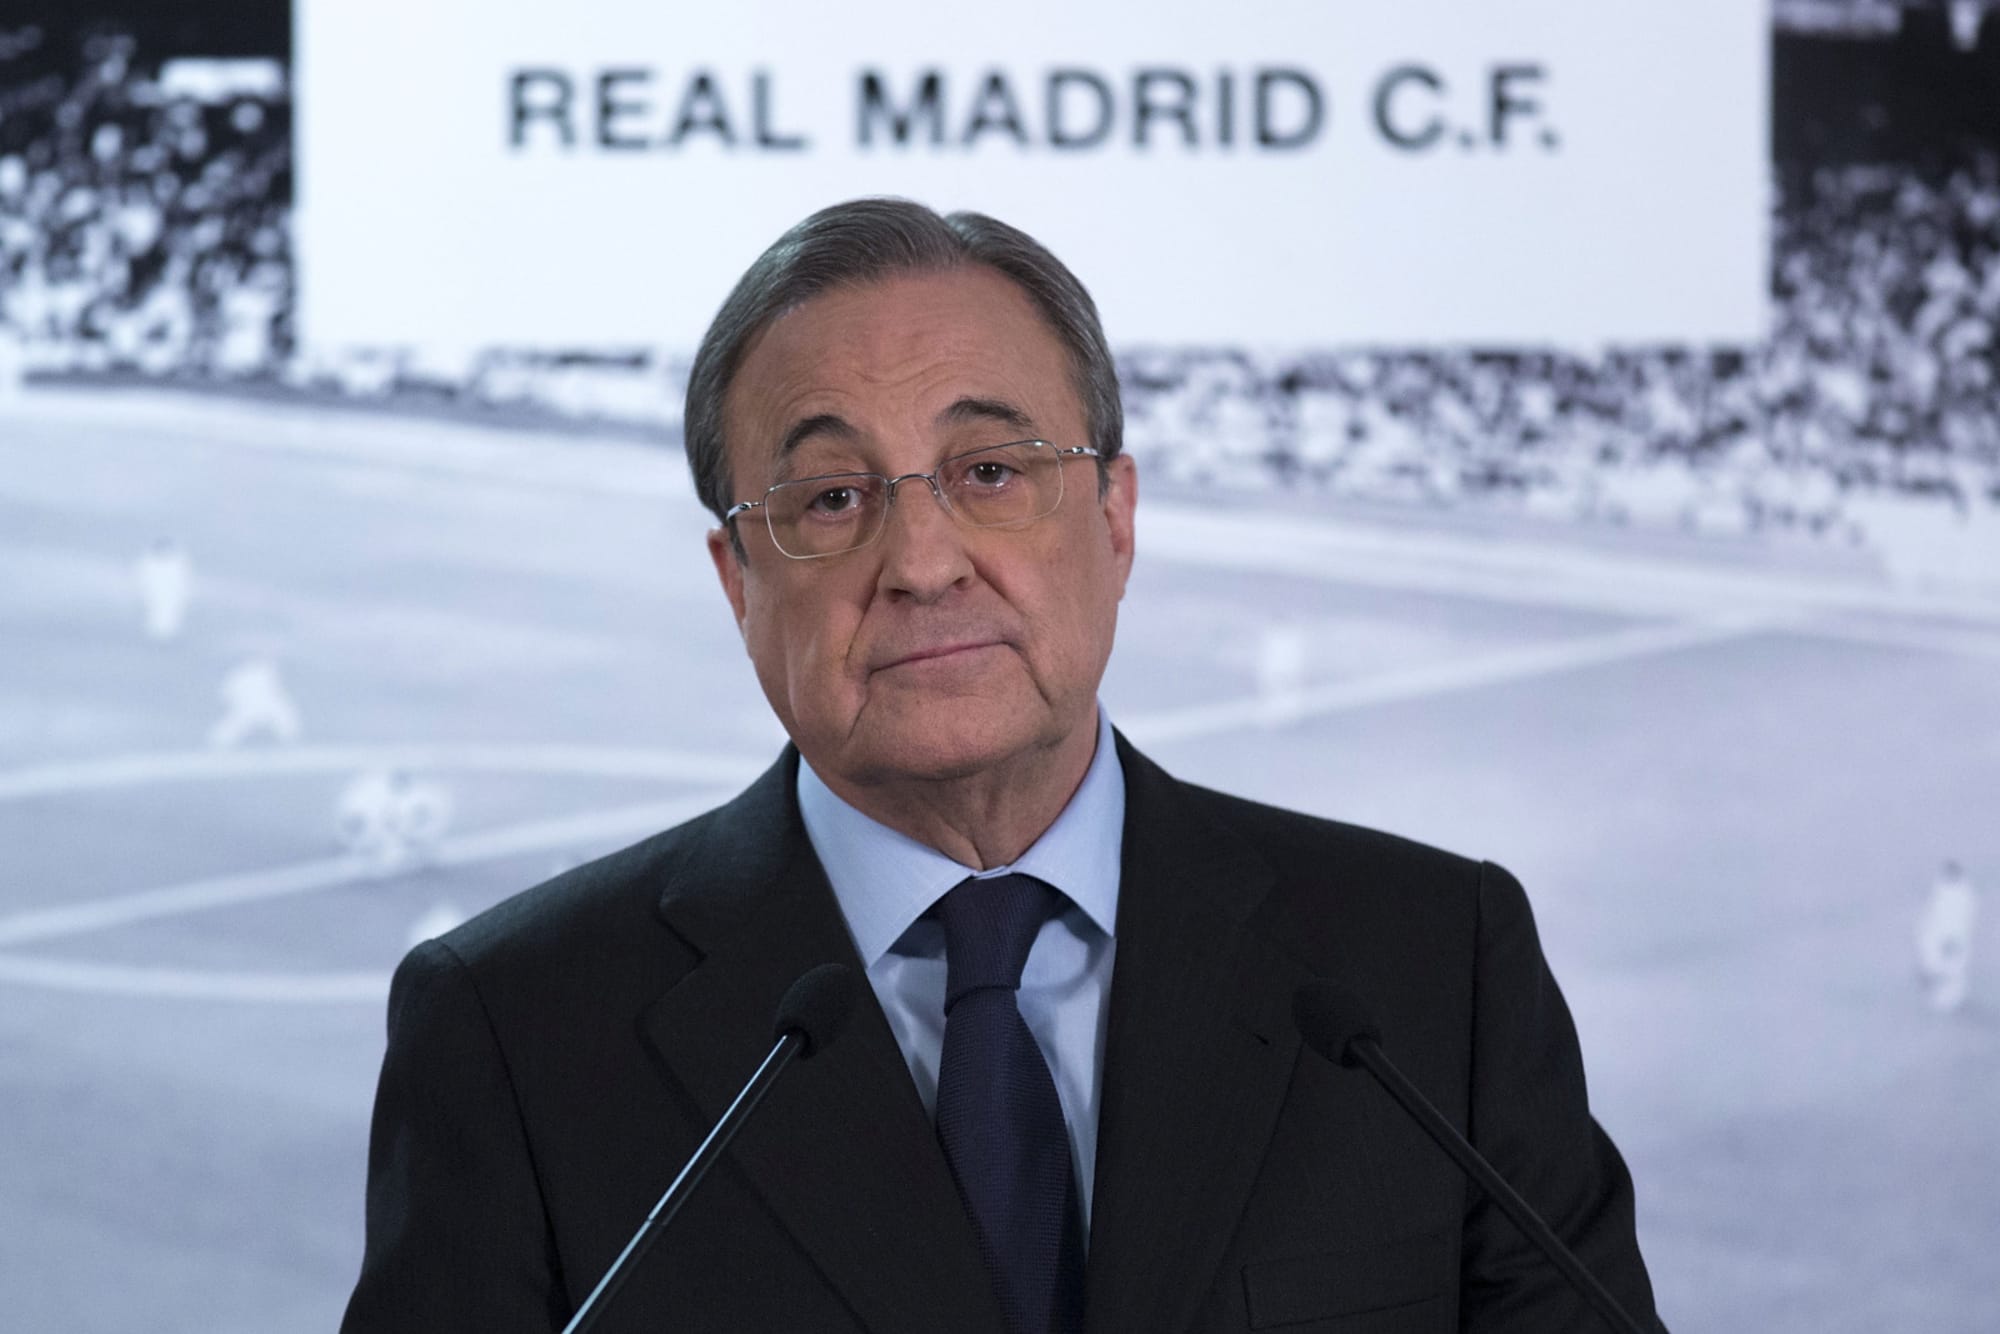  The Real Madrid player under contract who is closest to leaving this summer